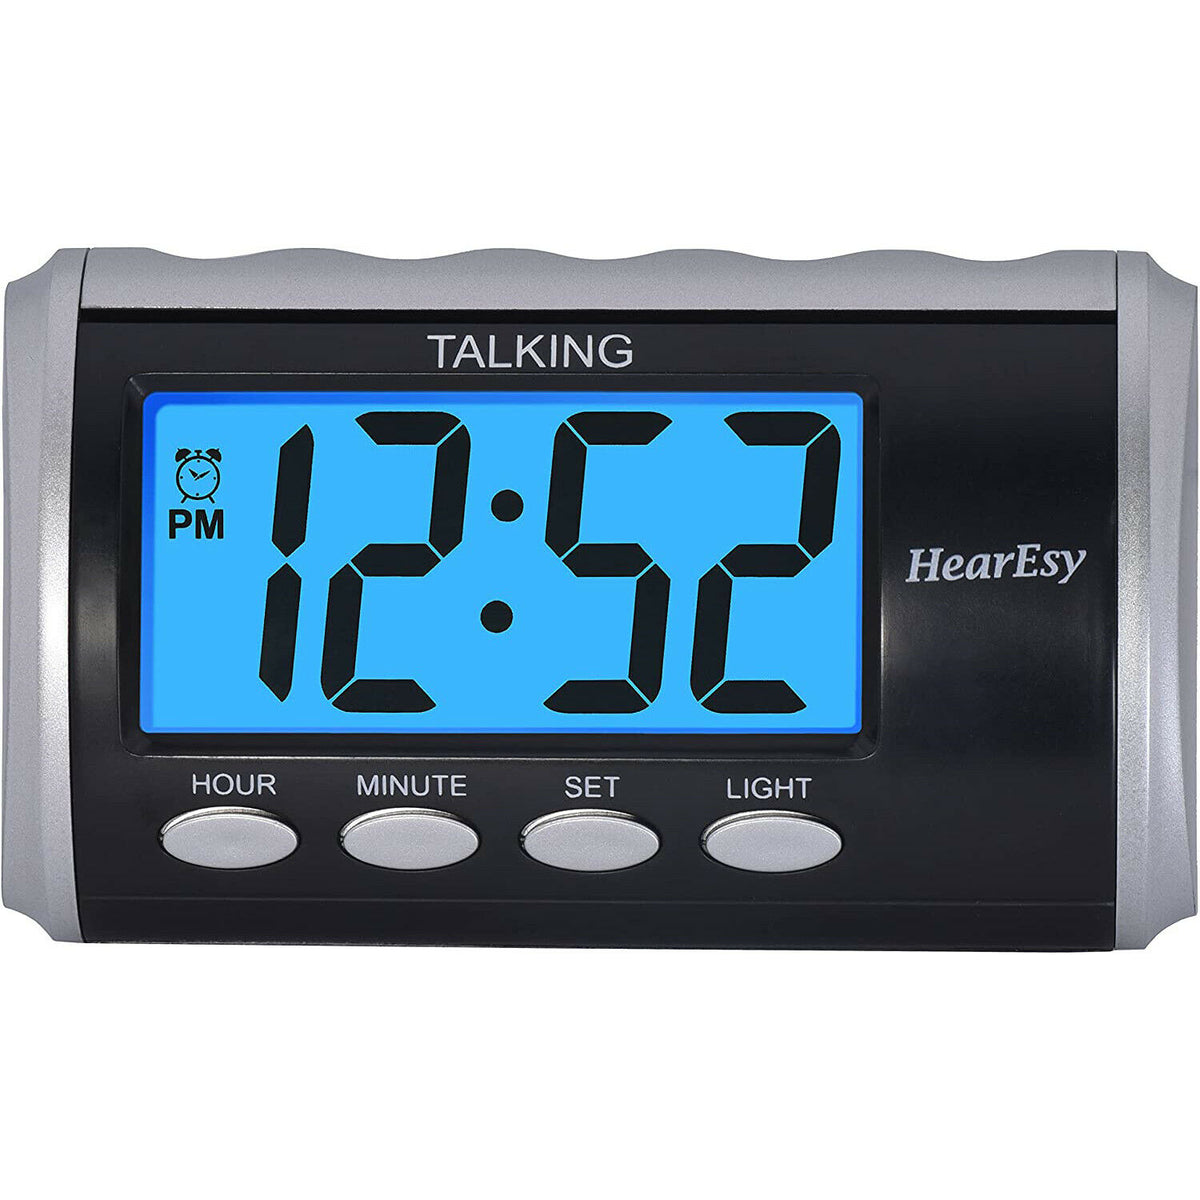 HearEsy Talking Alarm Clock for Visually Impaired Large Numbers Desk Clock for Senior